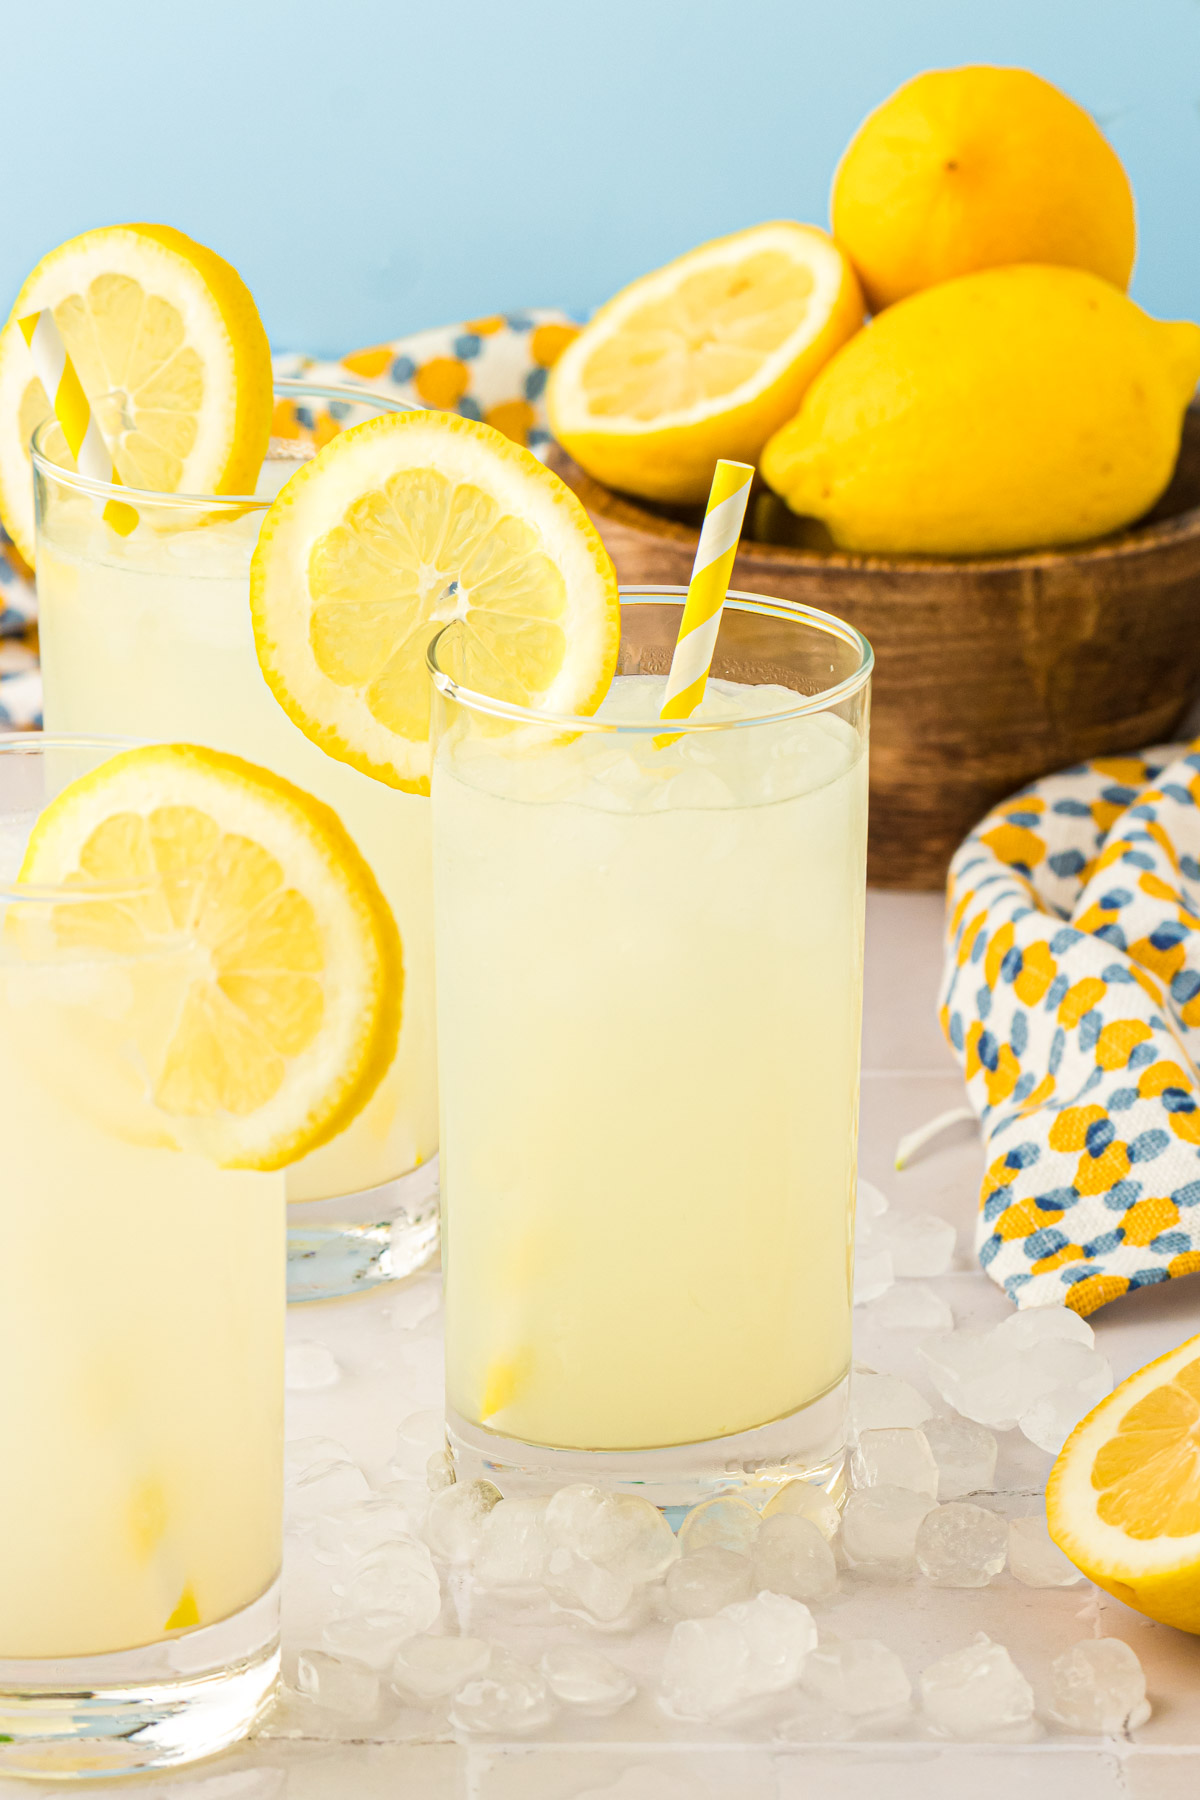 Glasses of lemonade on a gray table with ice around them.